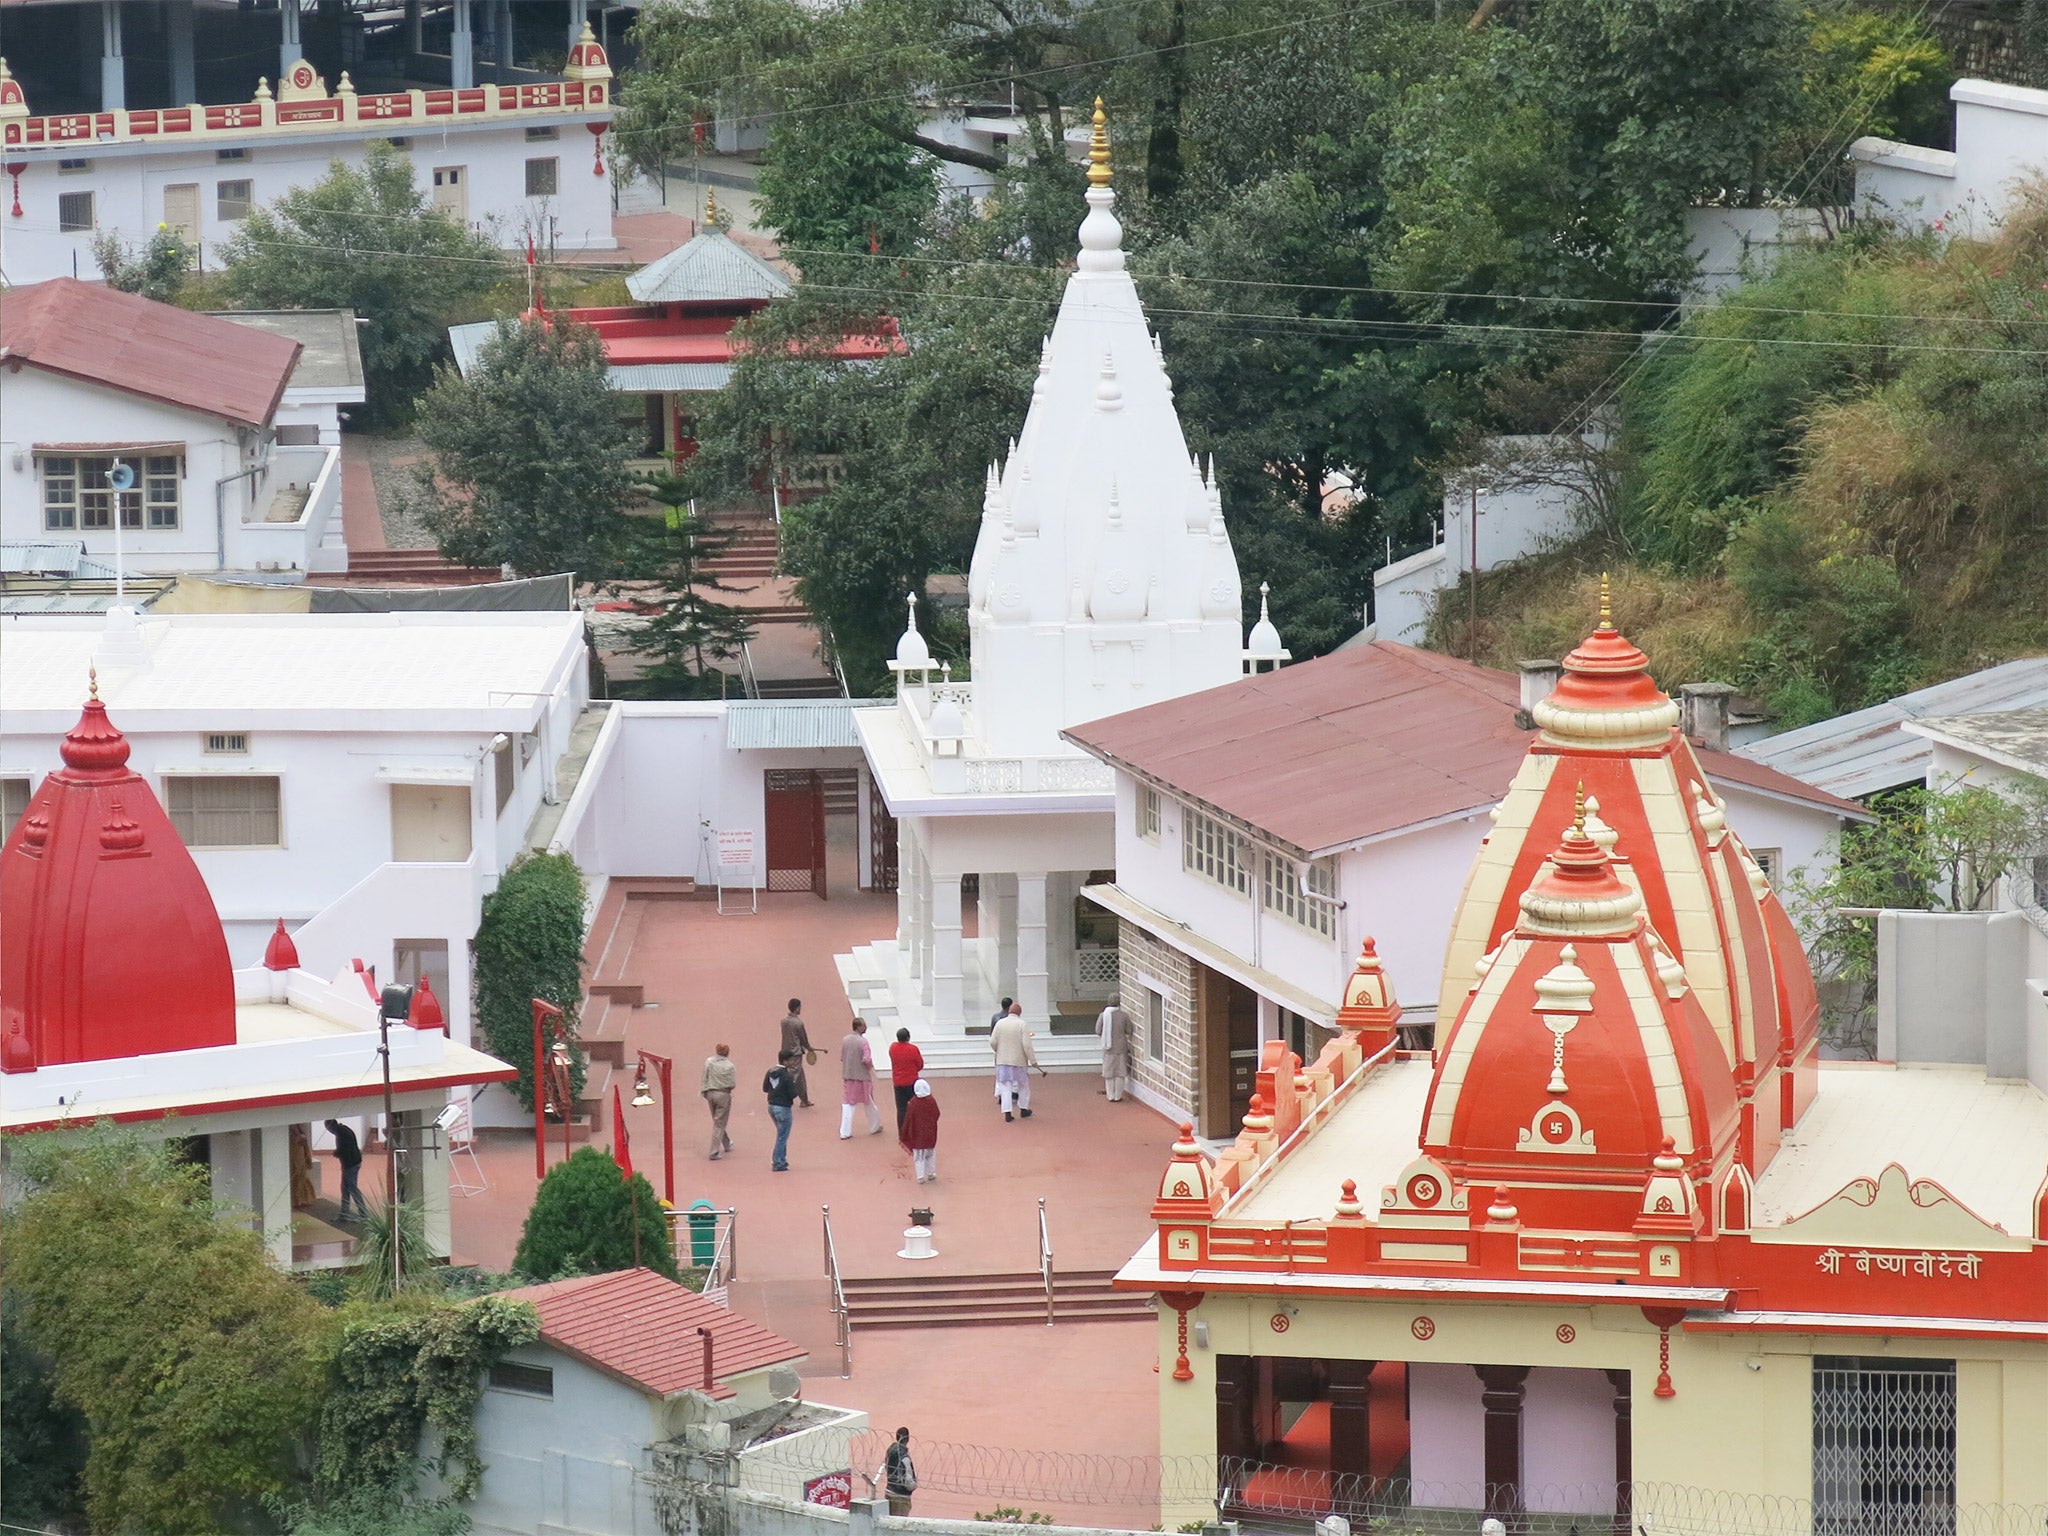 Mark Zuckerberg revealed that he had traveled to the Kainchi Dham ashram, pictured, during the early days of Facebook